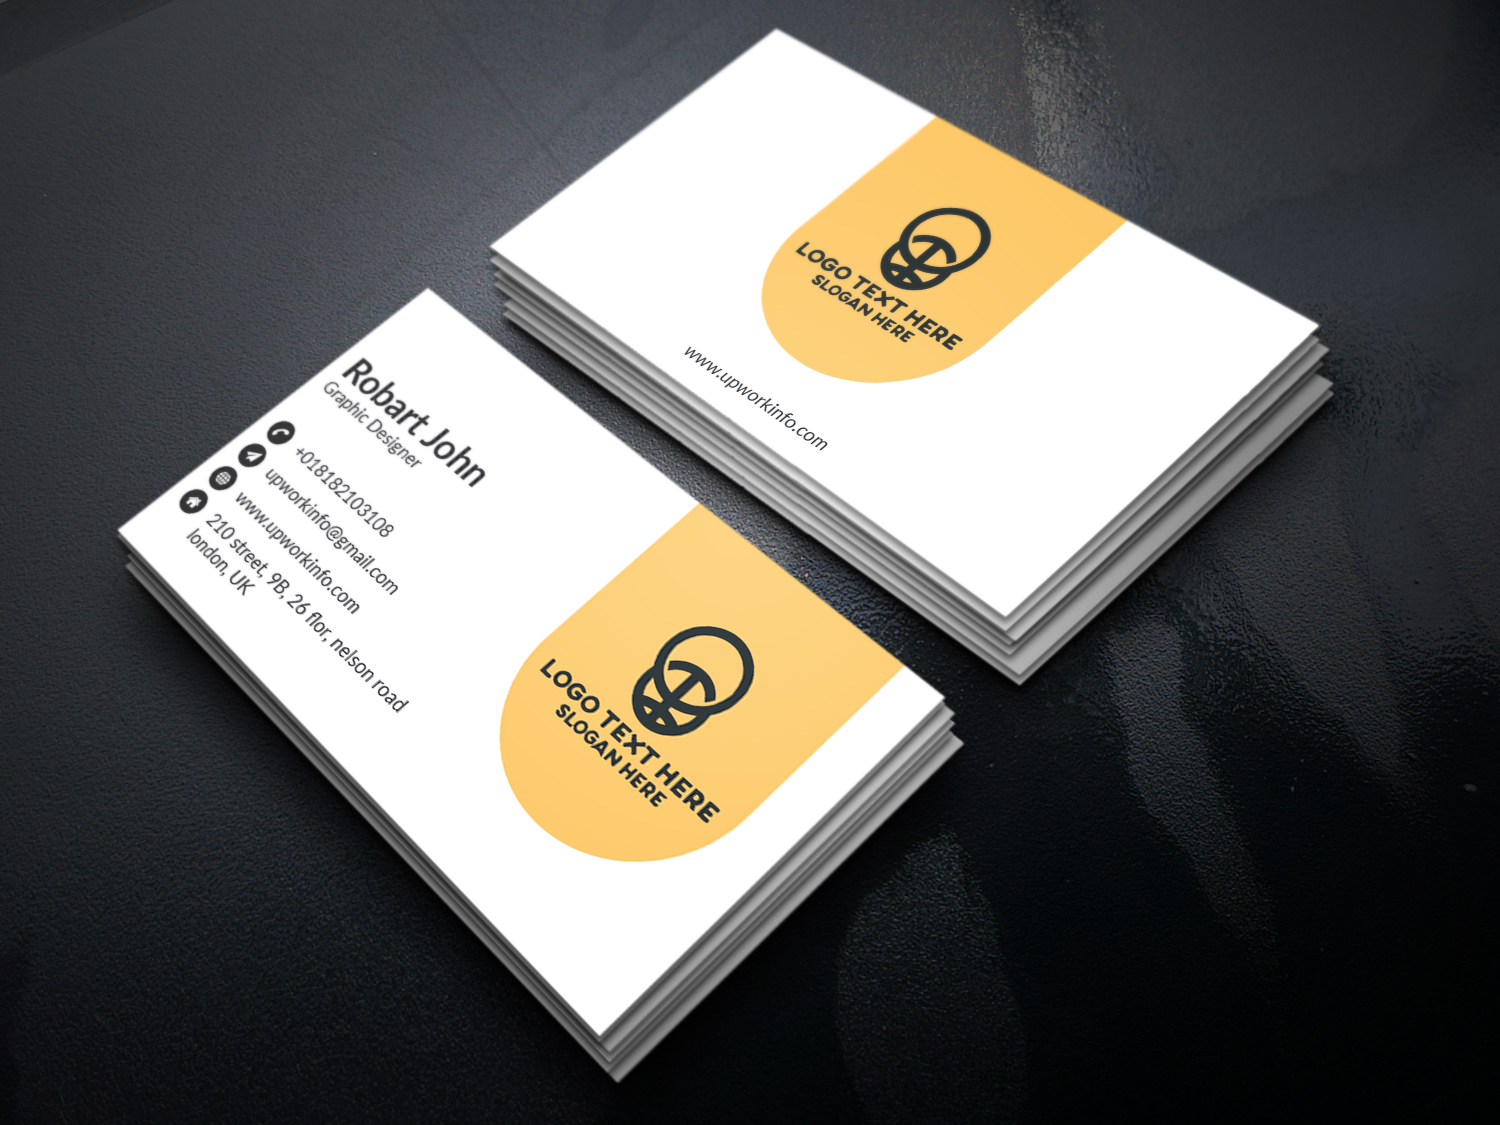 I will design modern, minimalist and premium looking business cards